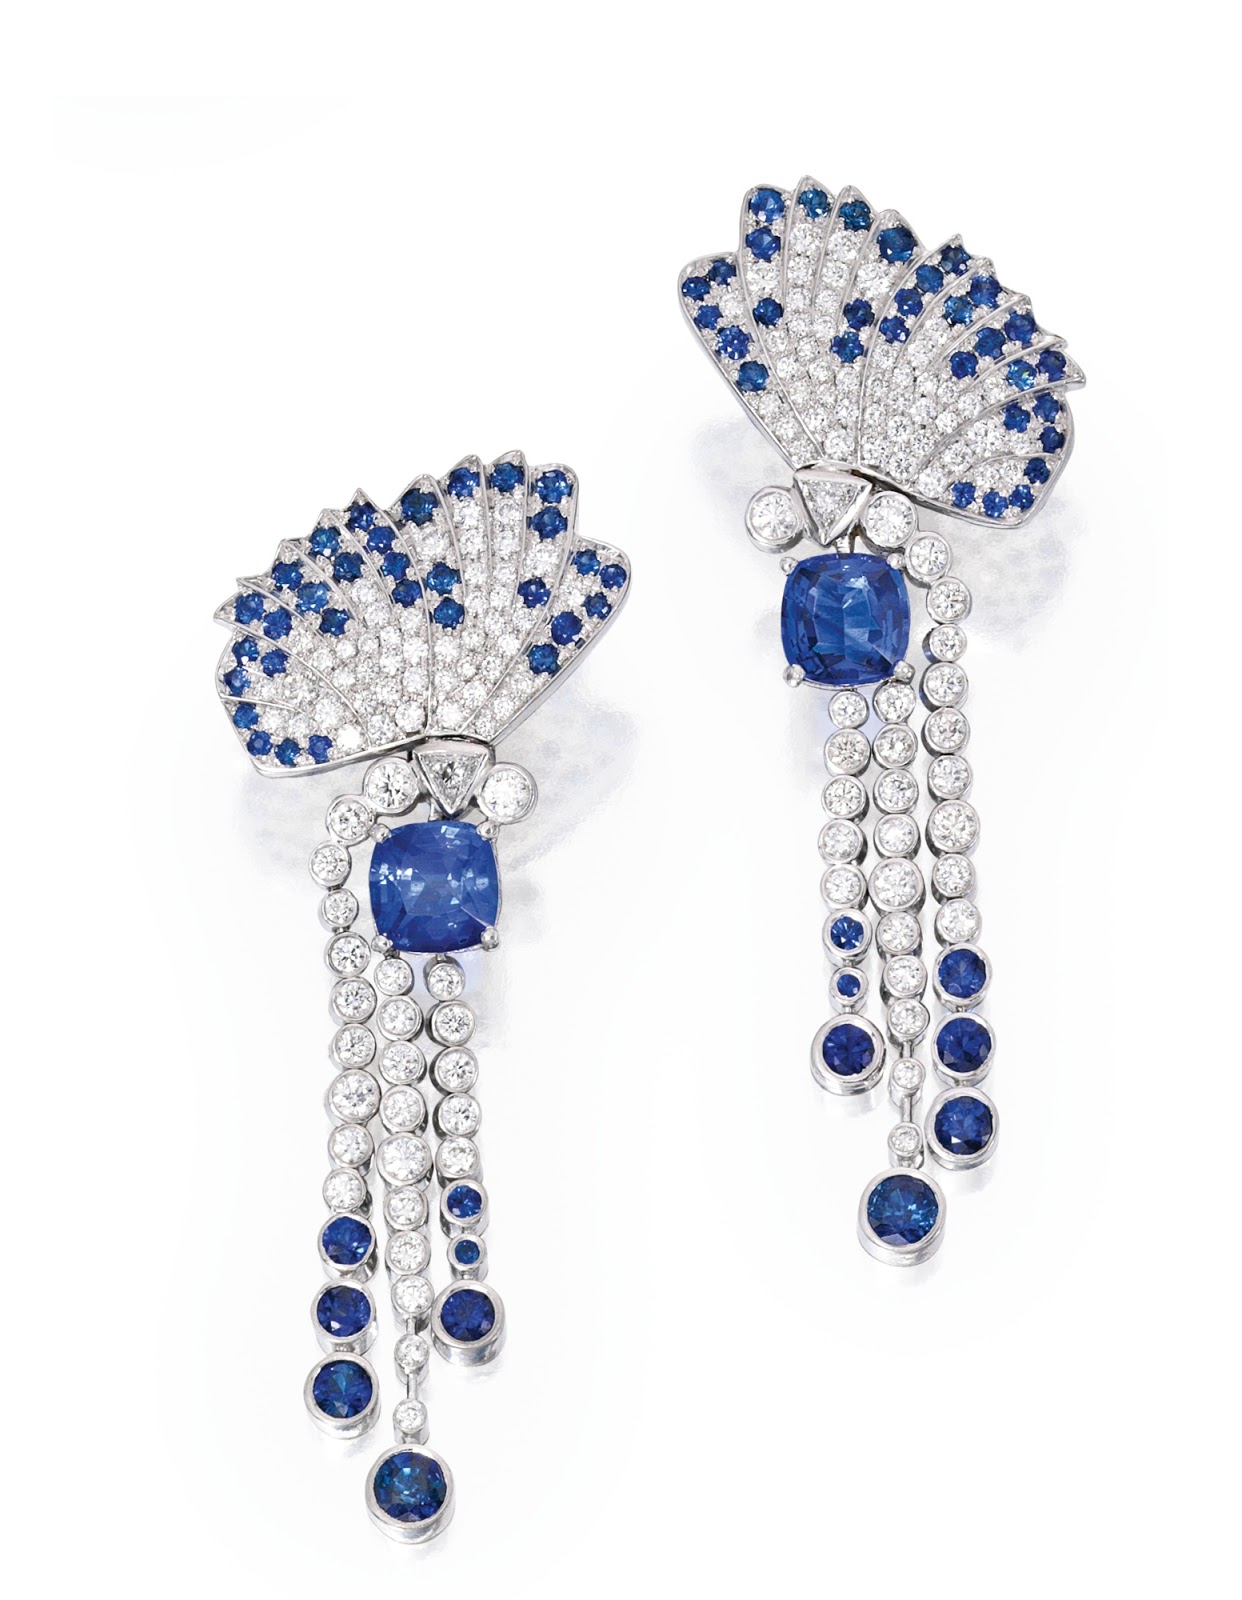 Marie Poutine's Jewels & Royals: Sapphires on the Ears